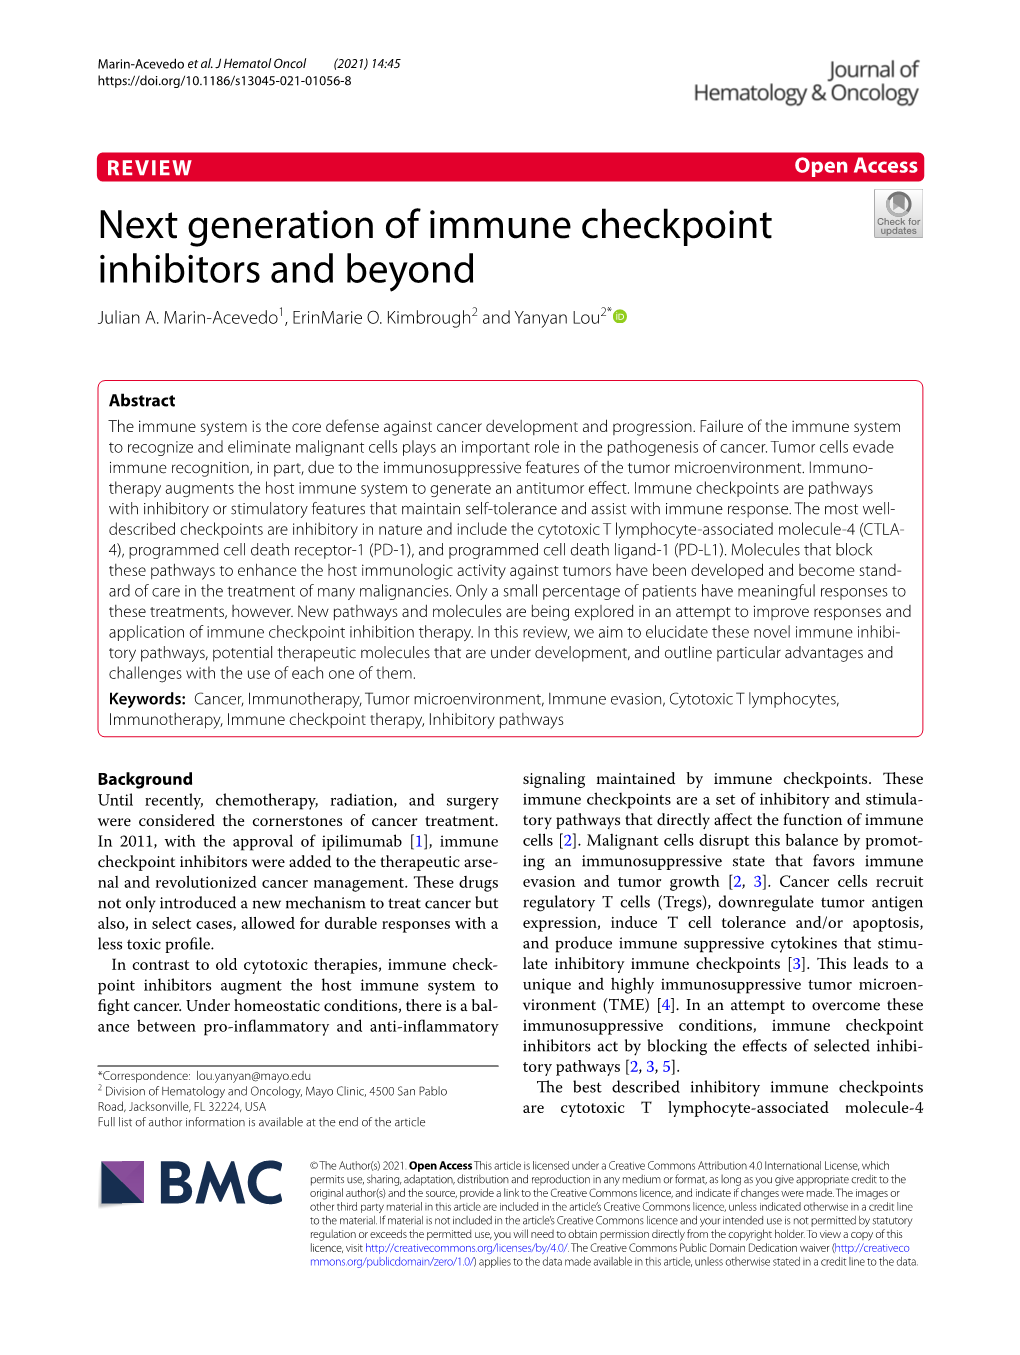 Next Generation of Immune Checkpoint Inhibitors and Beyond Julian A